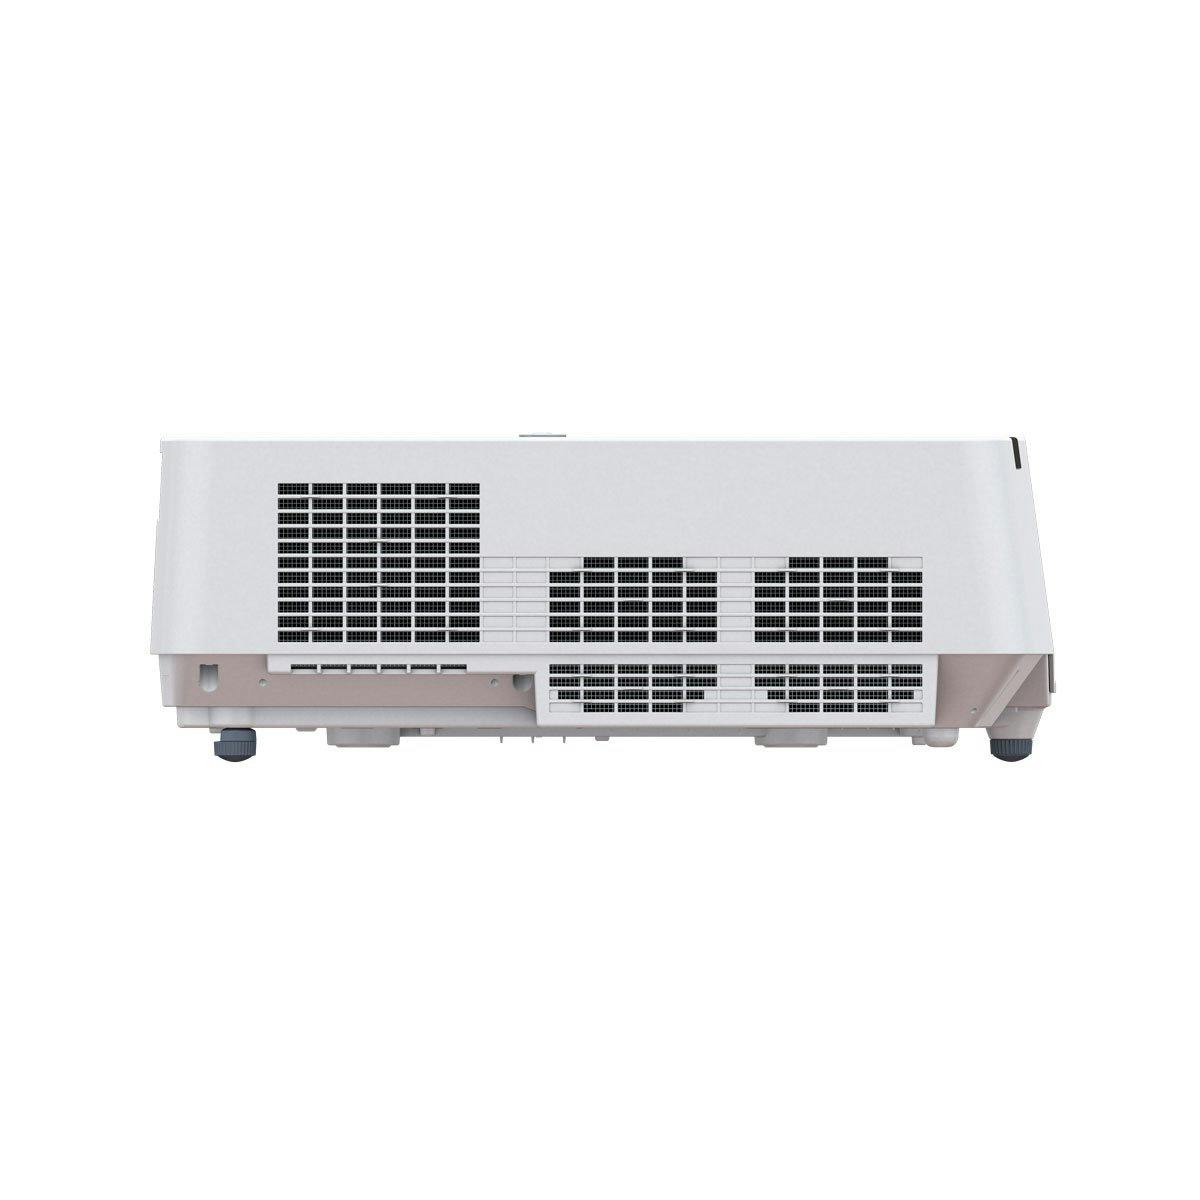 Christie LWU650-APS 3LCD laser projector | 121-055101-XX